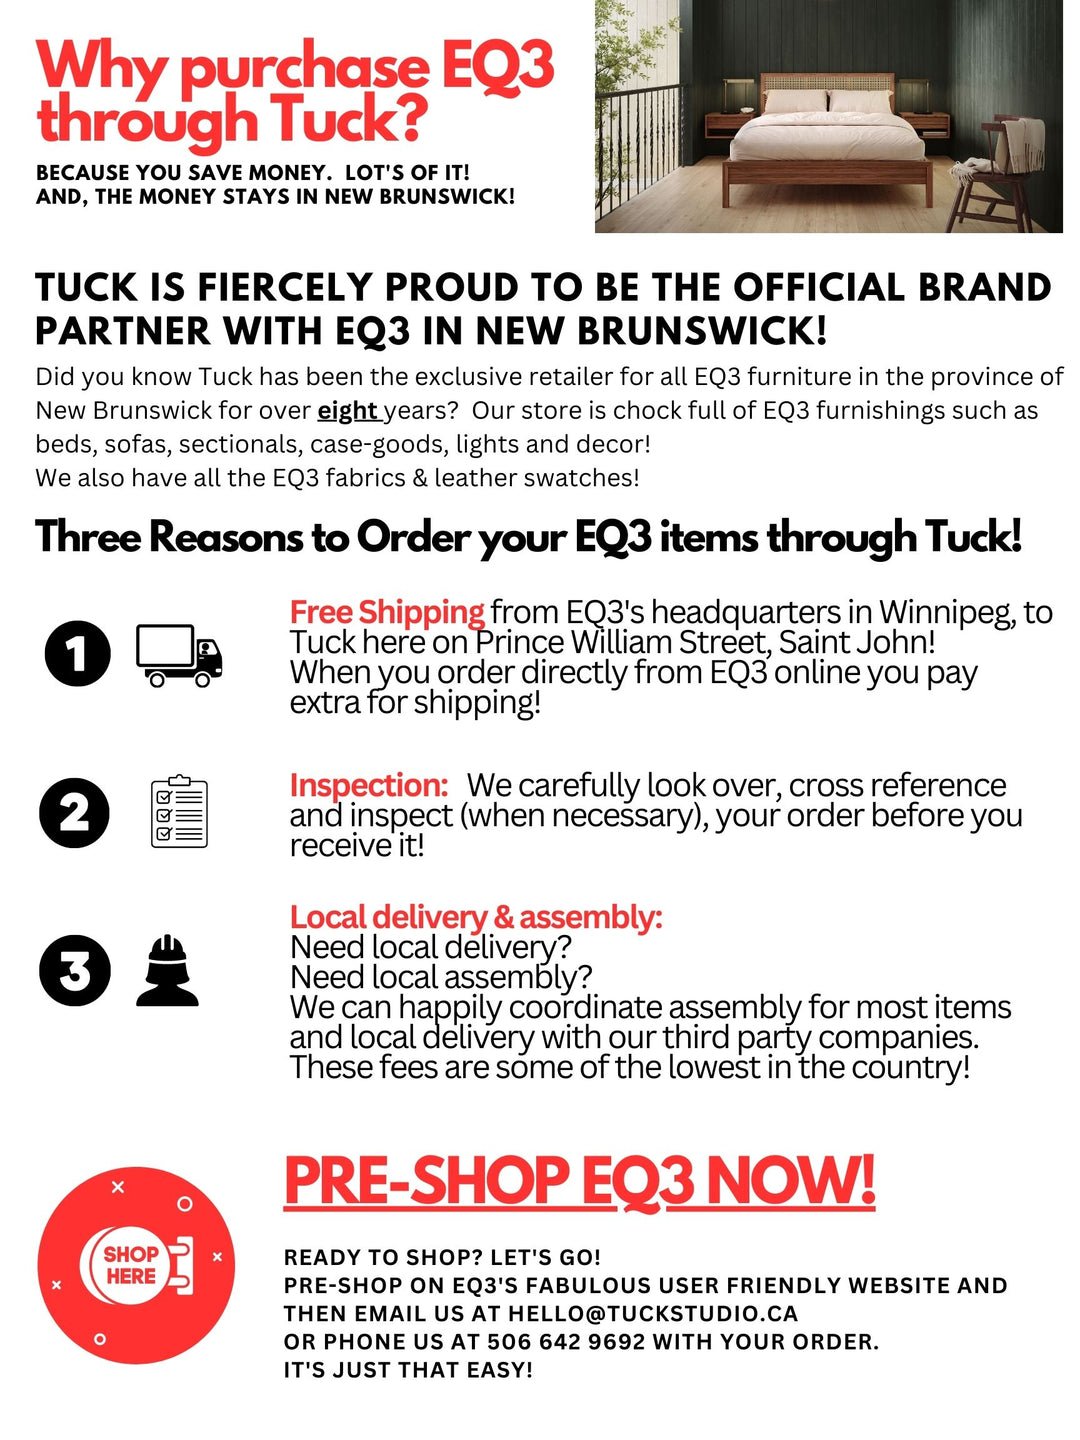 Purchase your EQ3 Stools through Tuck & Save Money!